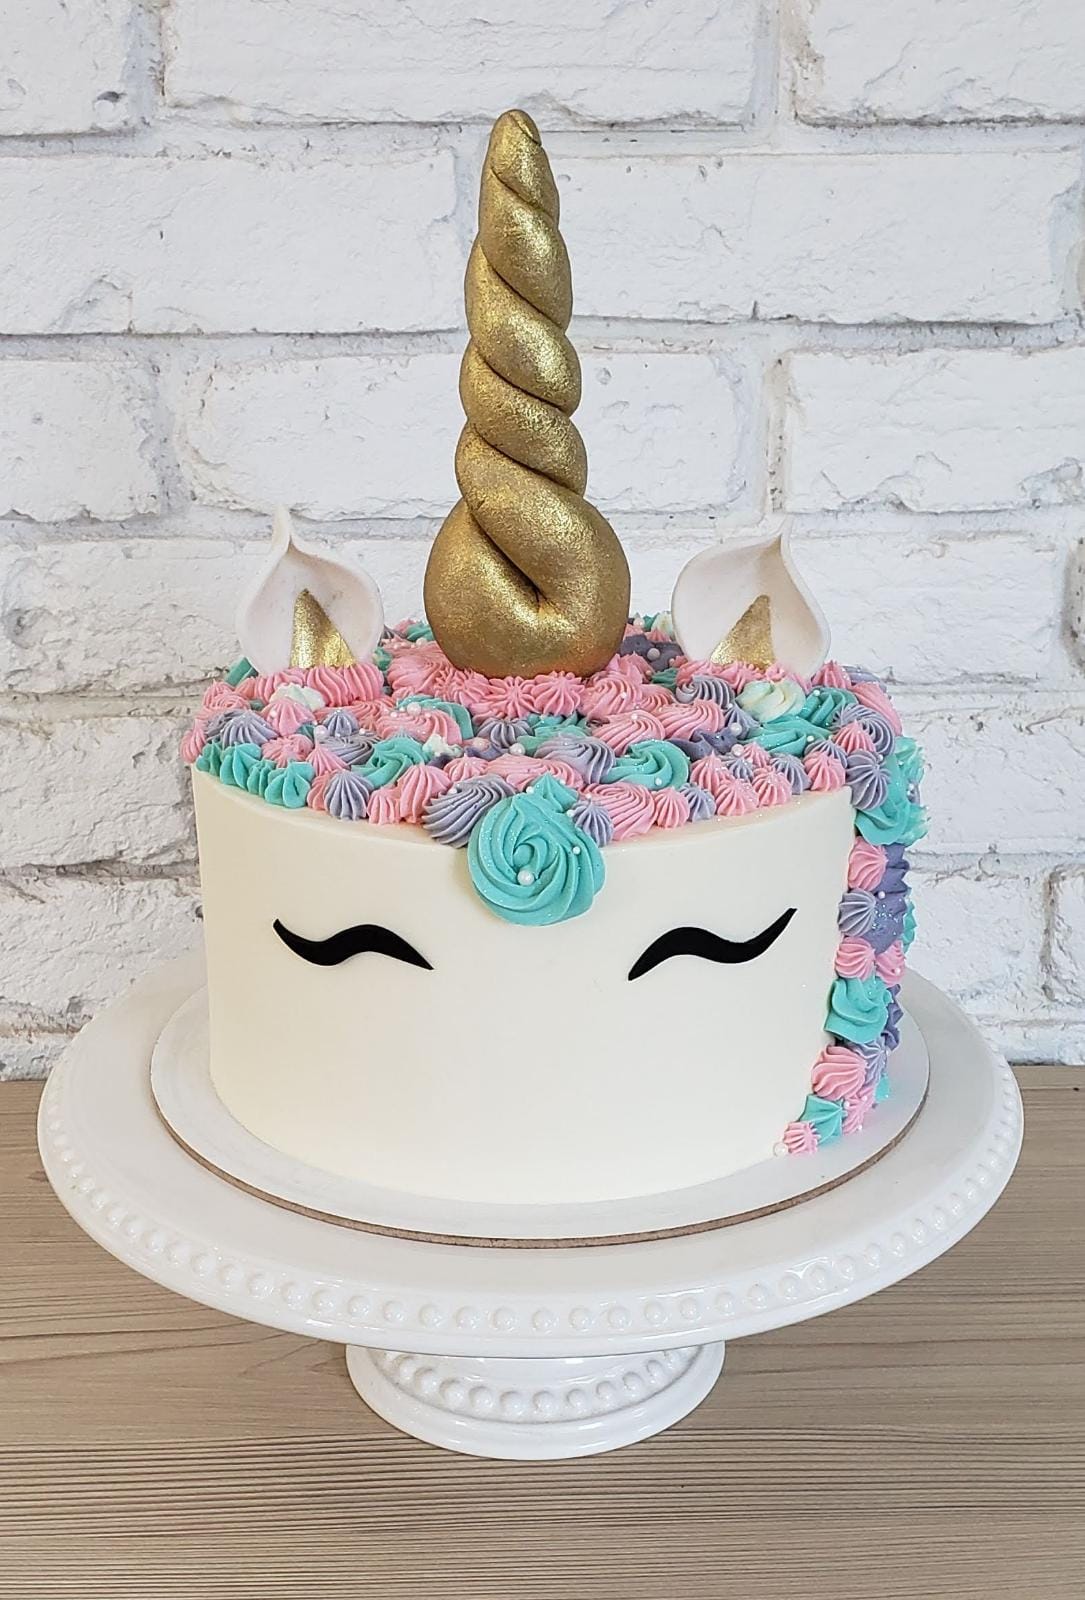 This Unicorn Cake Is So Easy To Make For Your Child's Birthday Party -  Celebrity Parents Magazine